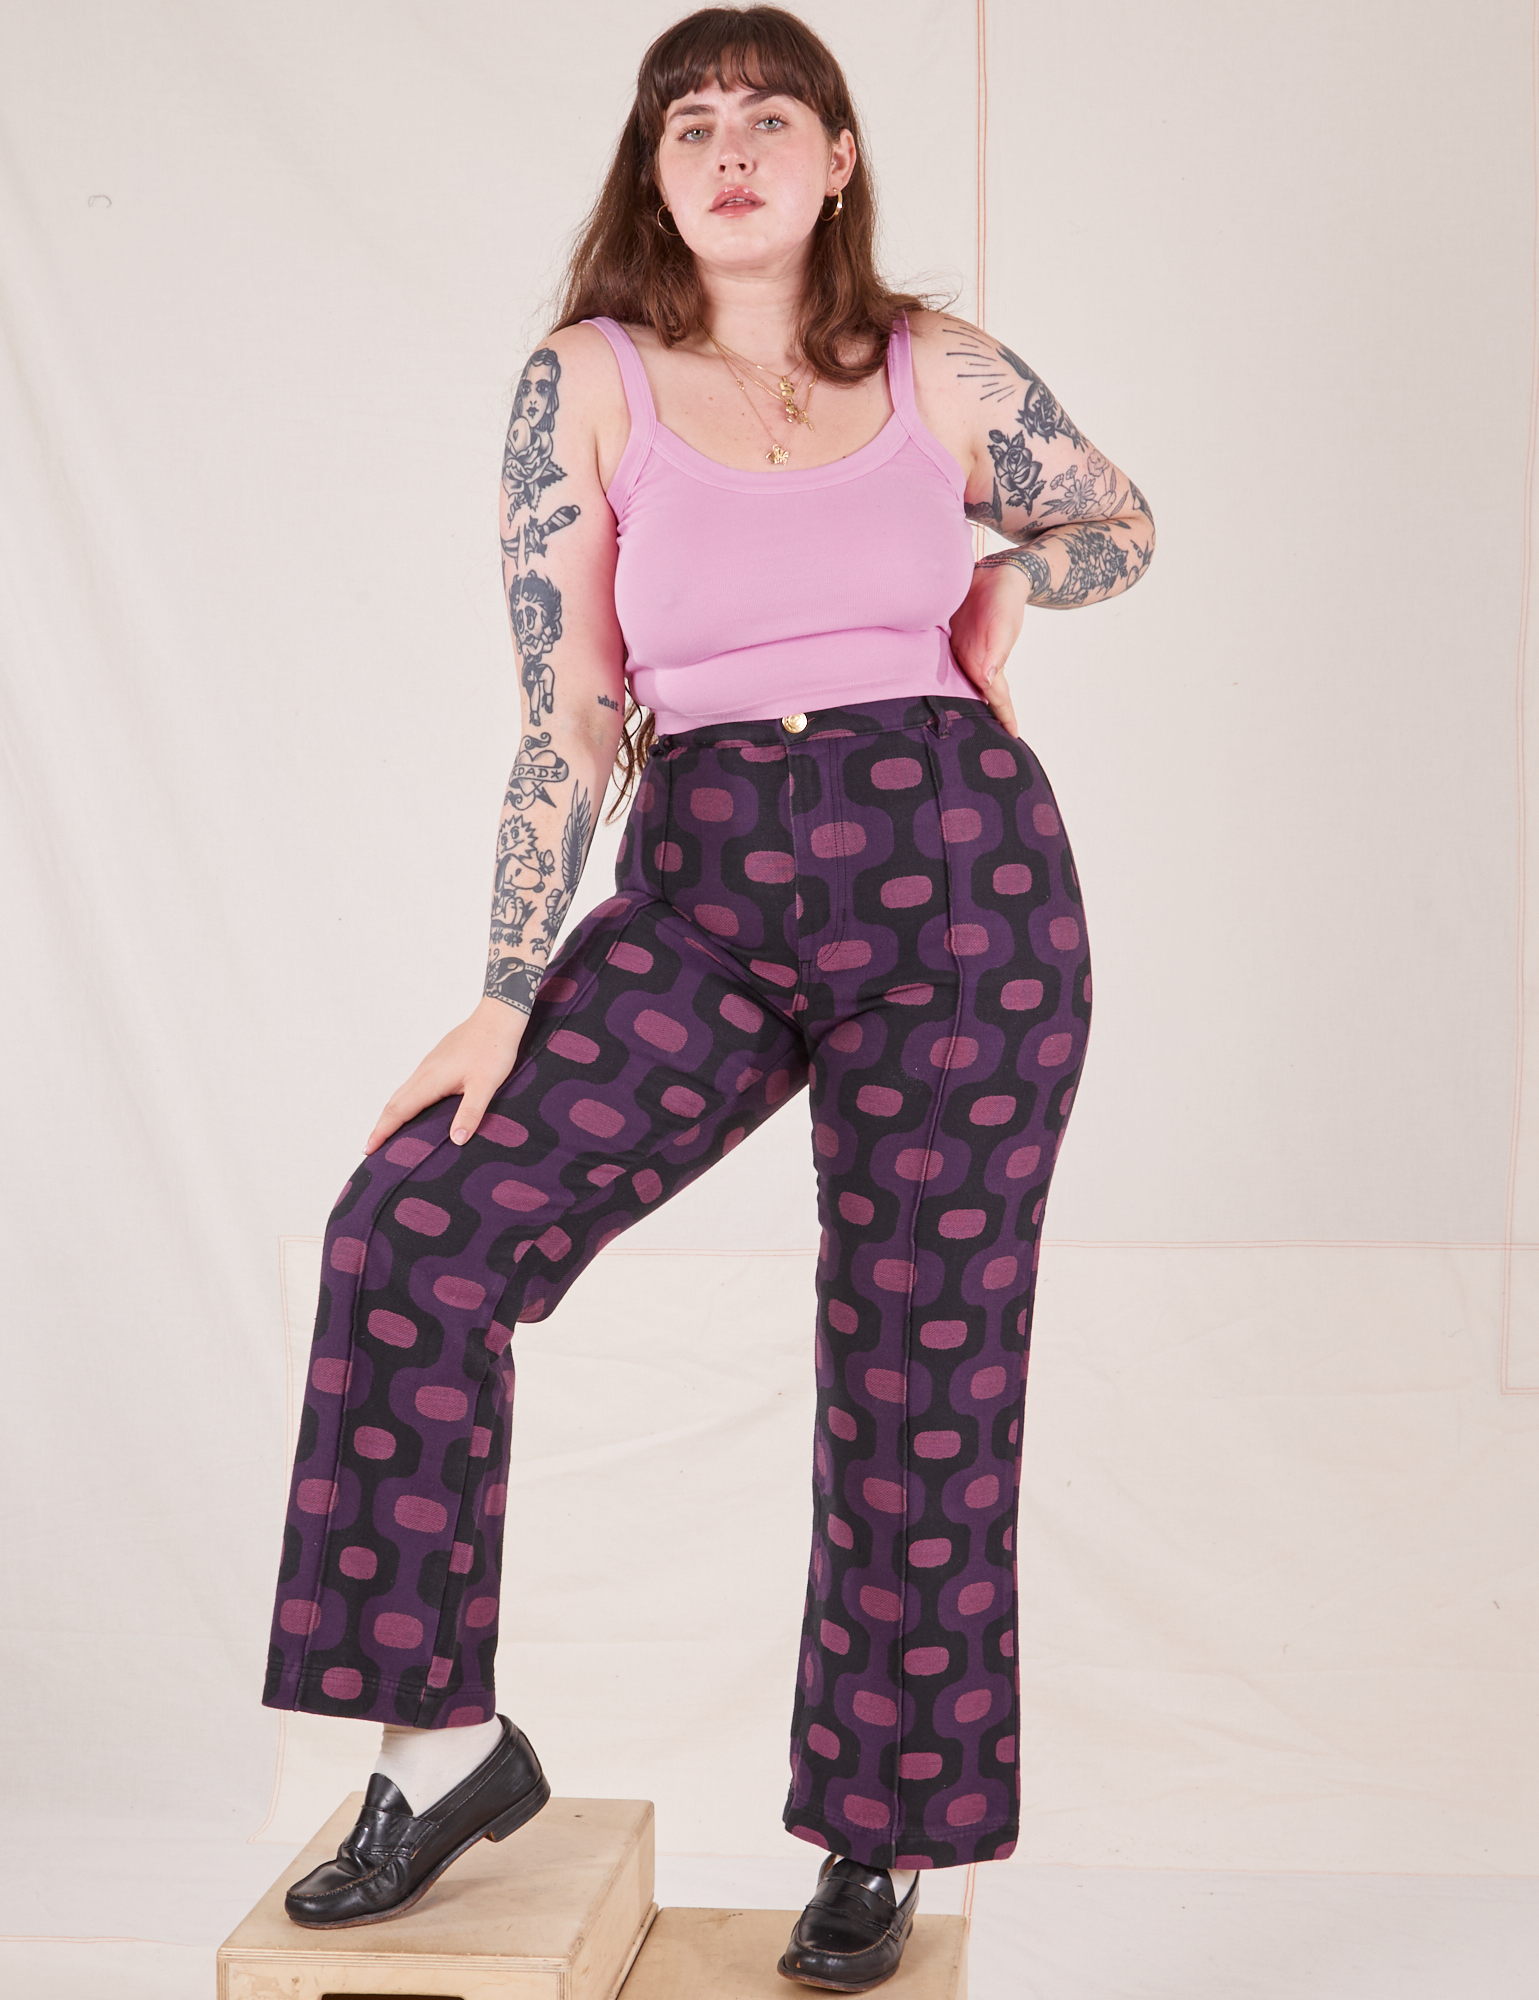 Sydney is 5&#39;9&quot; and wearing L Western Pants in Purple Tile Jacquard paired with bubblegum pink Cami